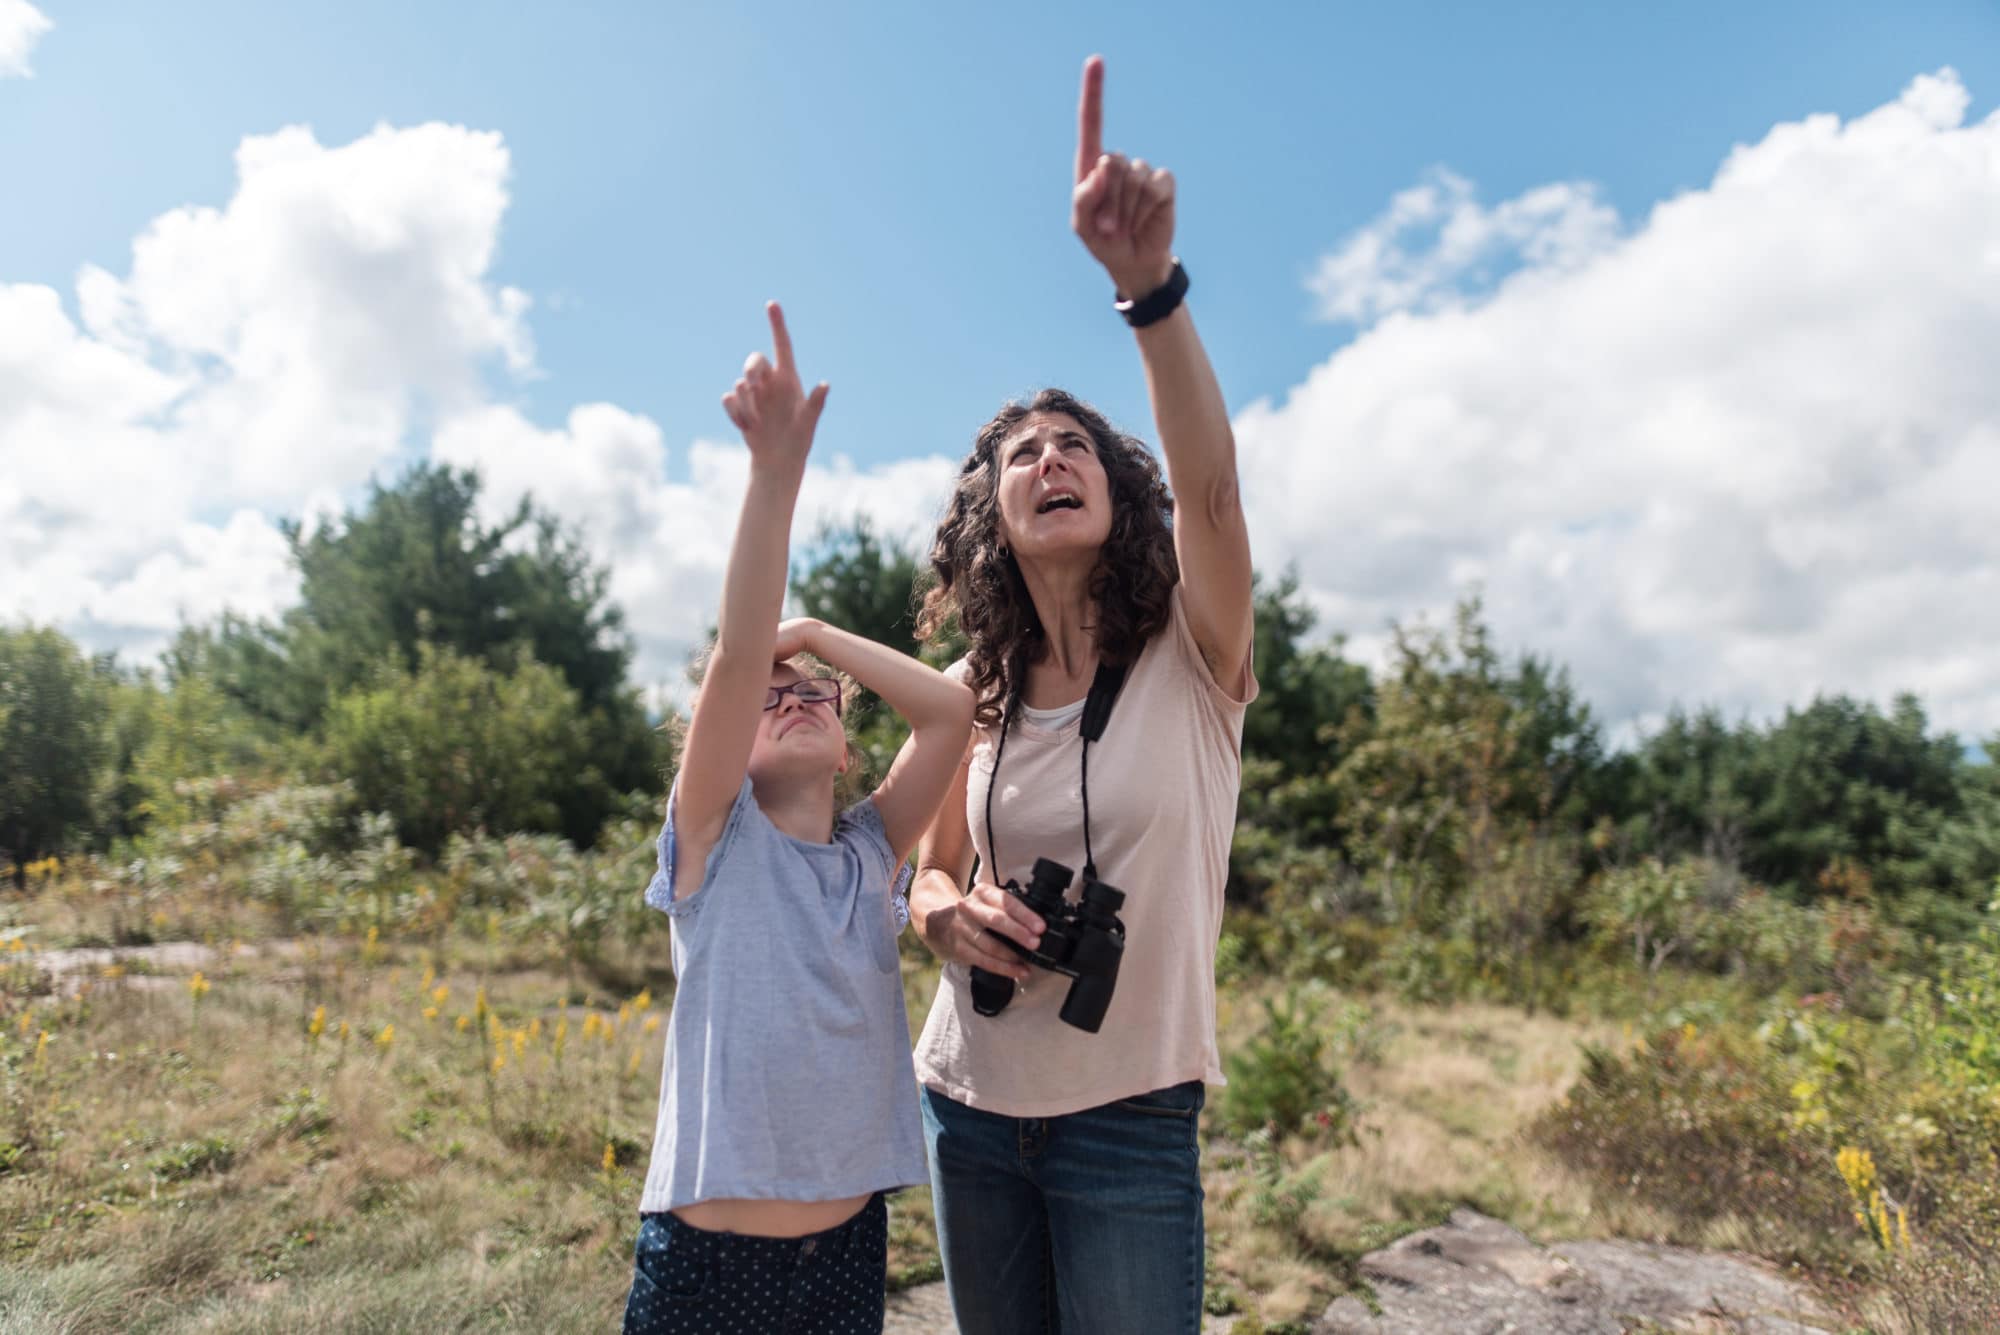 Harris Center teacher-naturalist Susie Spikol and a budding naturalist from Pierce Elementary School point to birds during a hawkwatching outing. (photo © Ben Conant)